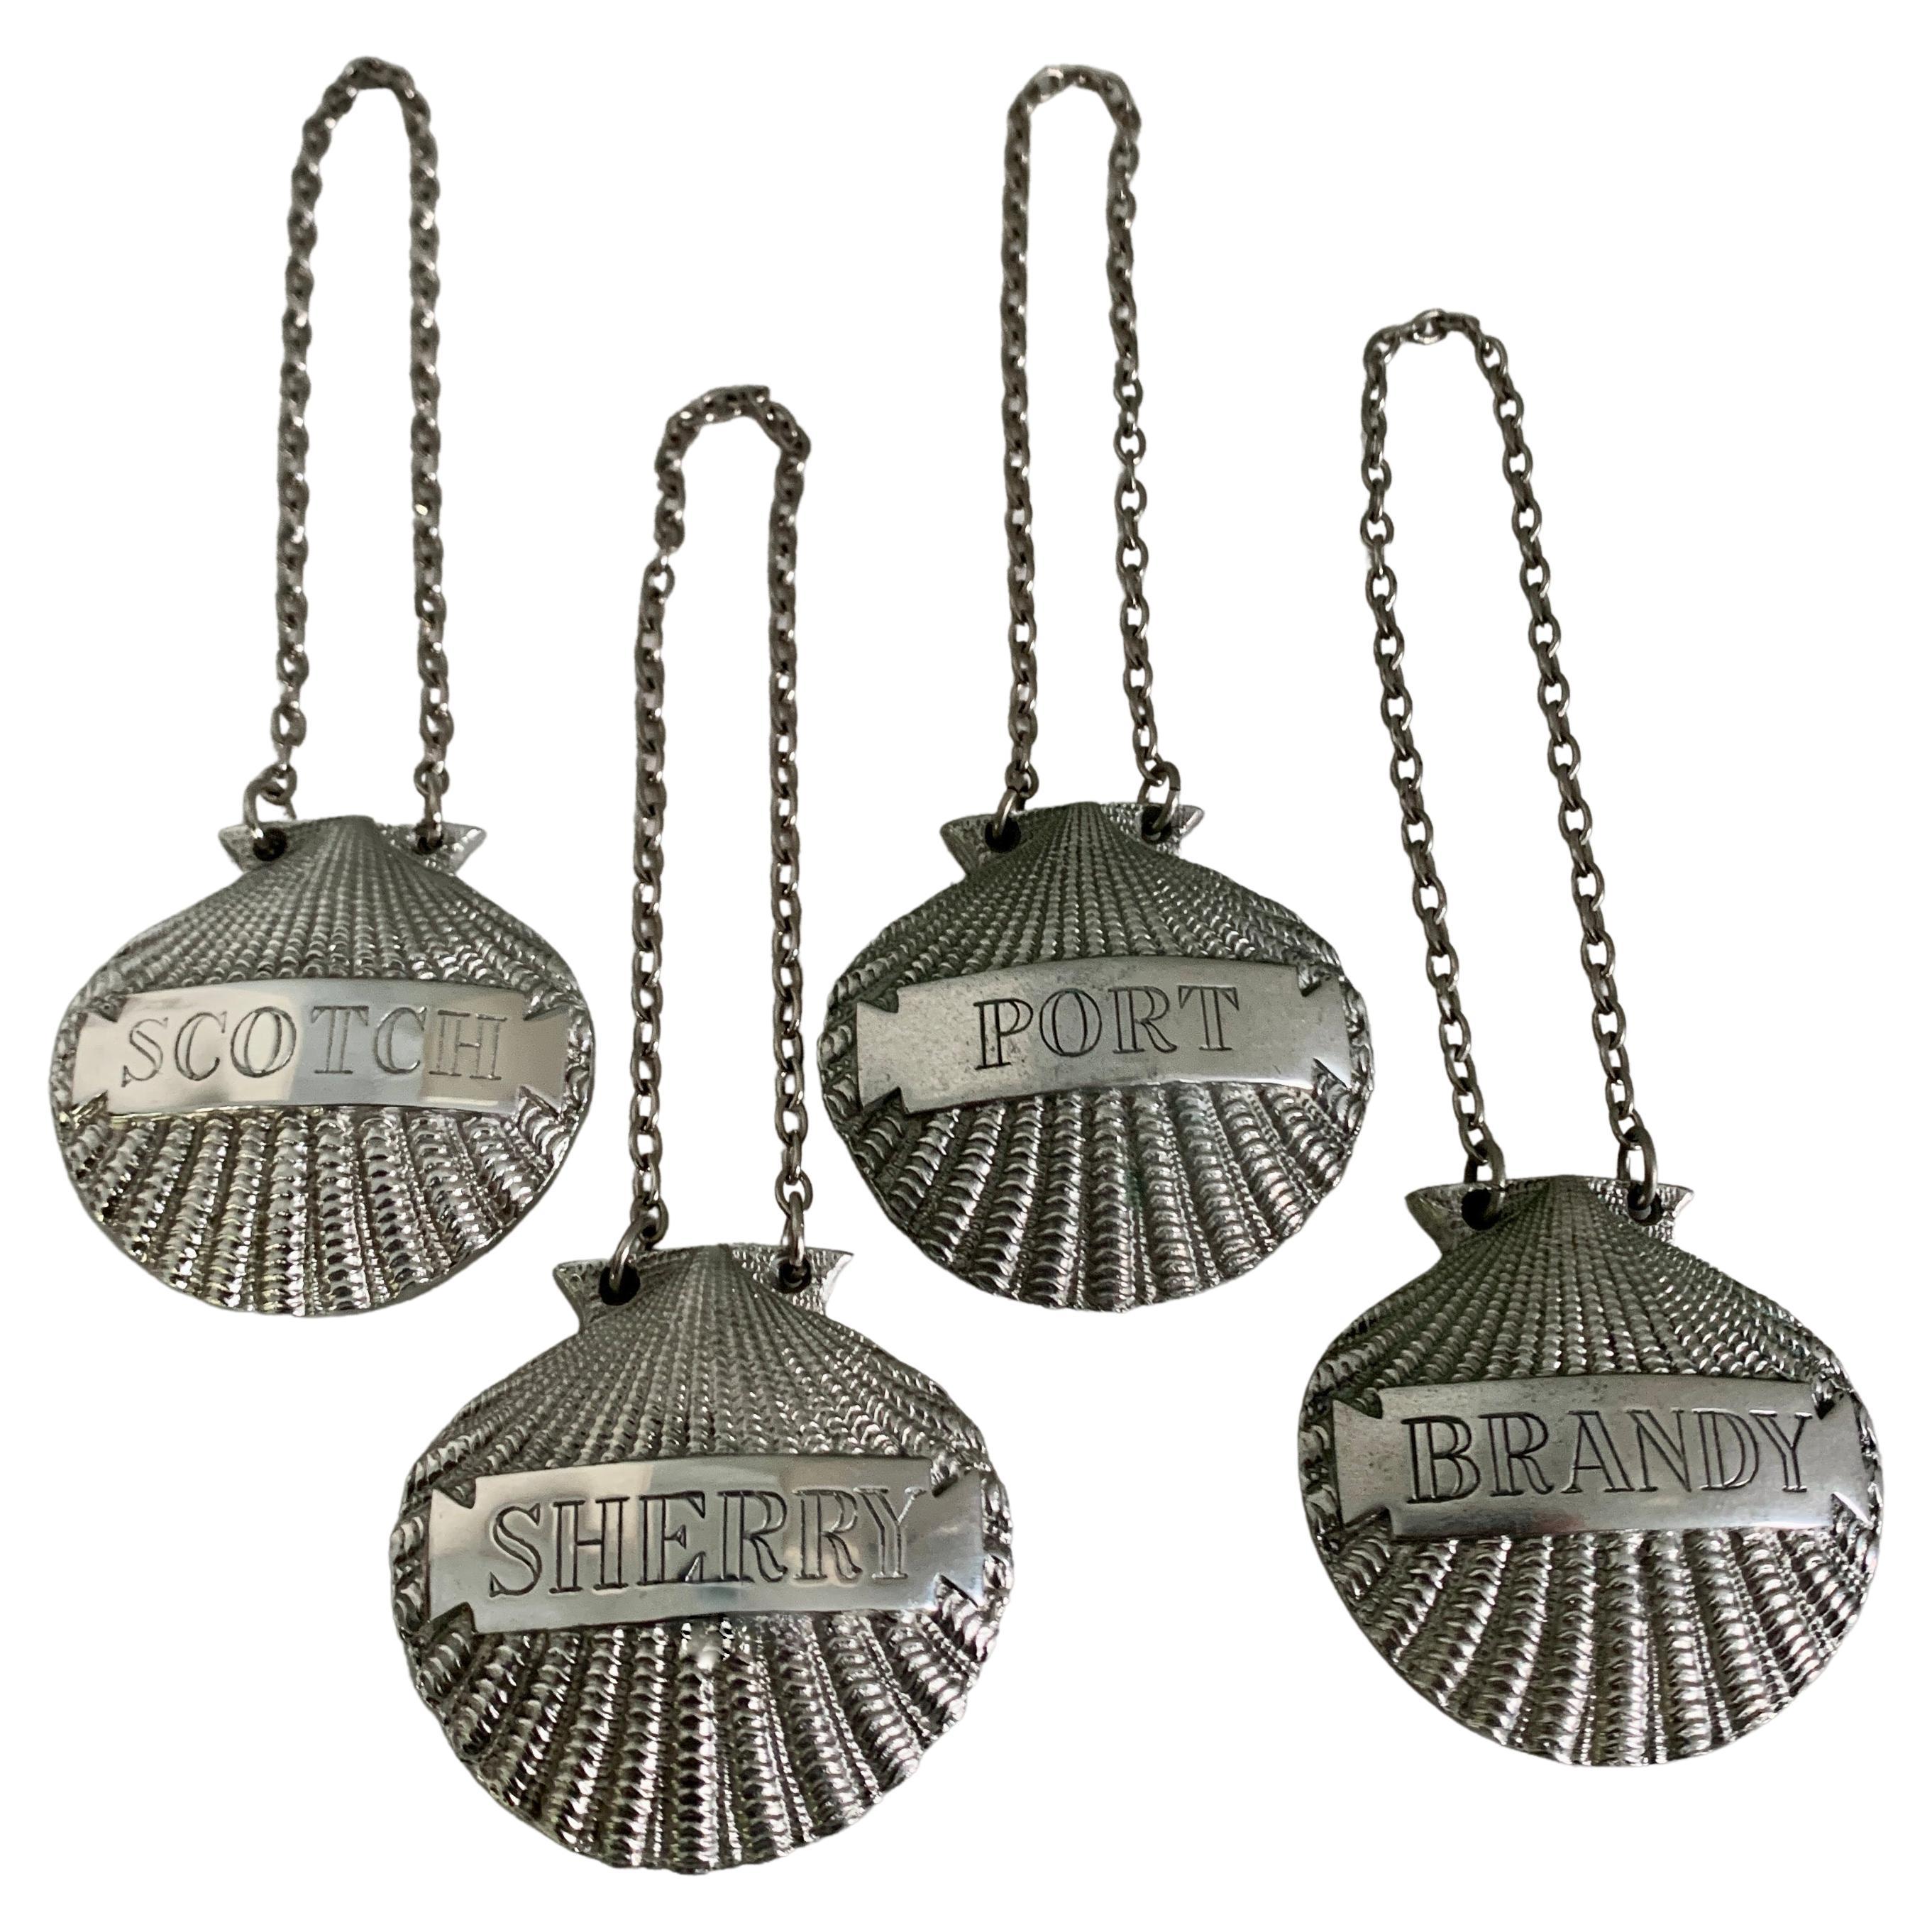 A very sophisticated, made in the U.K., set of 4 Liquor Hanging labels. The shell motif is polished pewter with a silver chain that easily slips over your existing decanters. 

Labels for Port, Sherry, Scotch and Brandy - a compliment to any bar